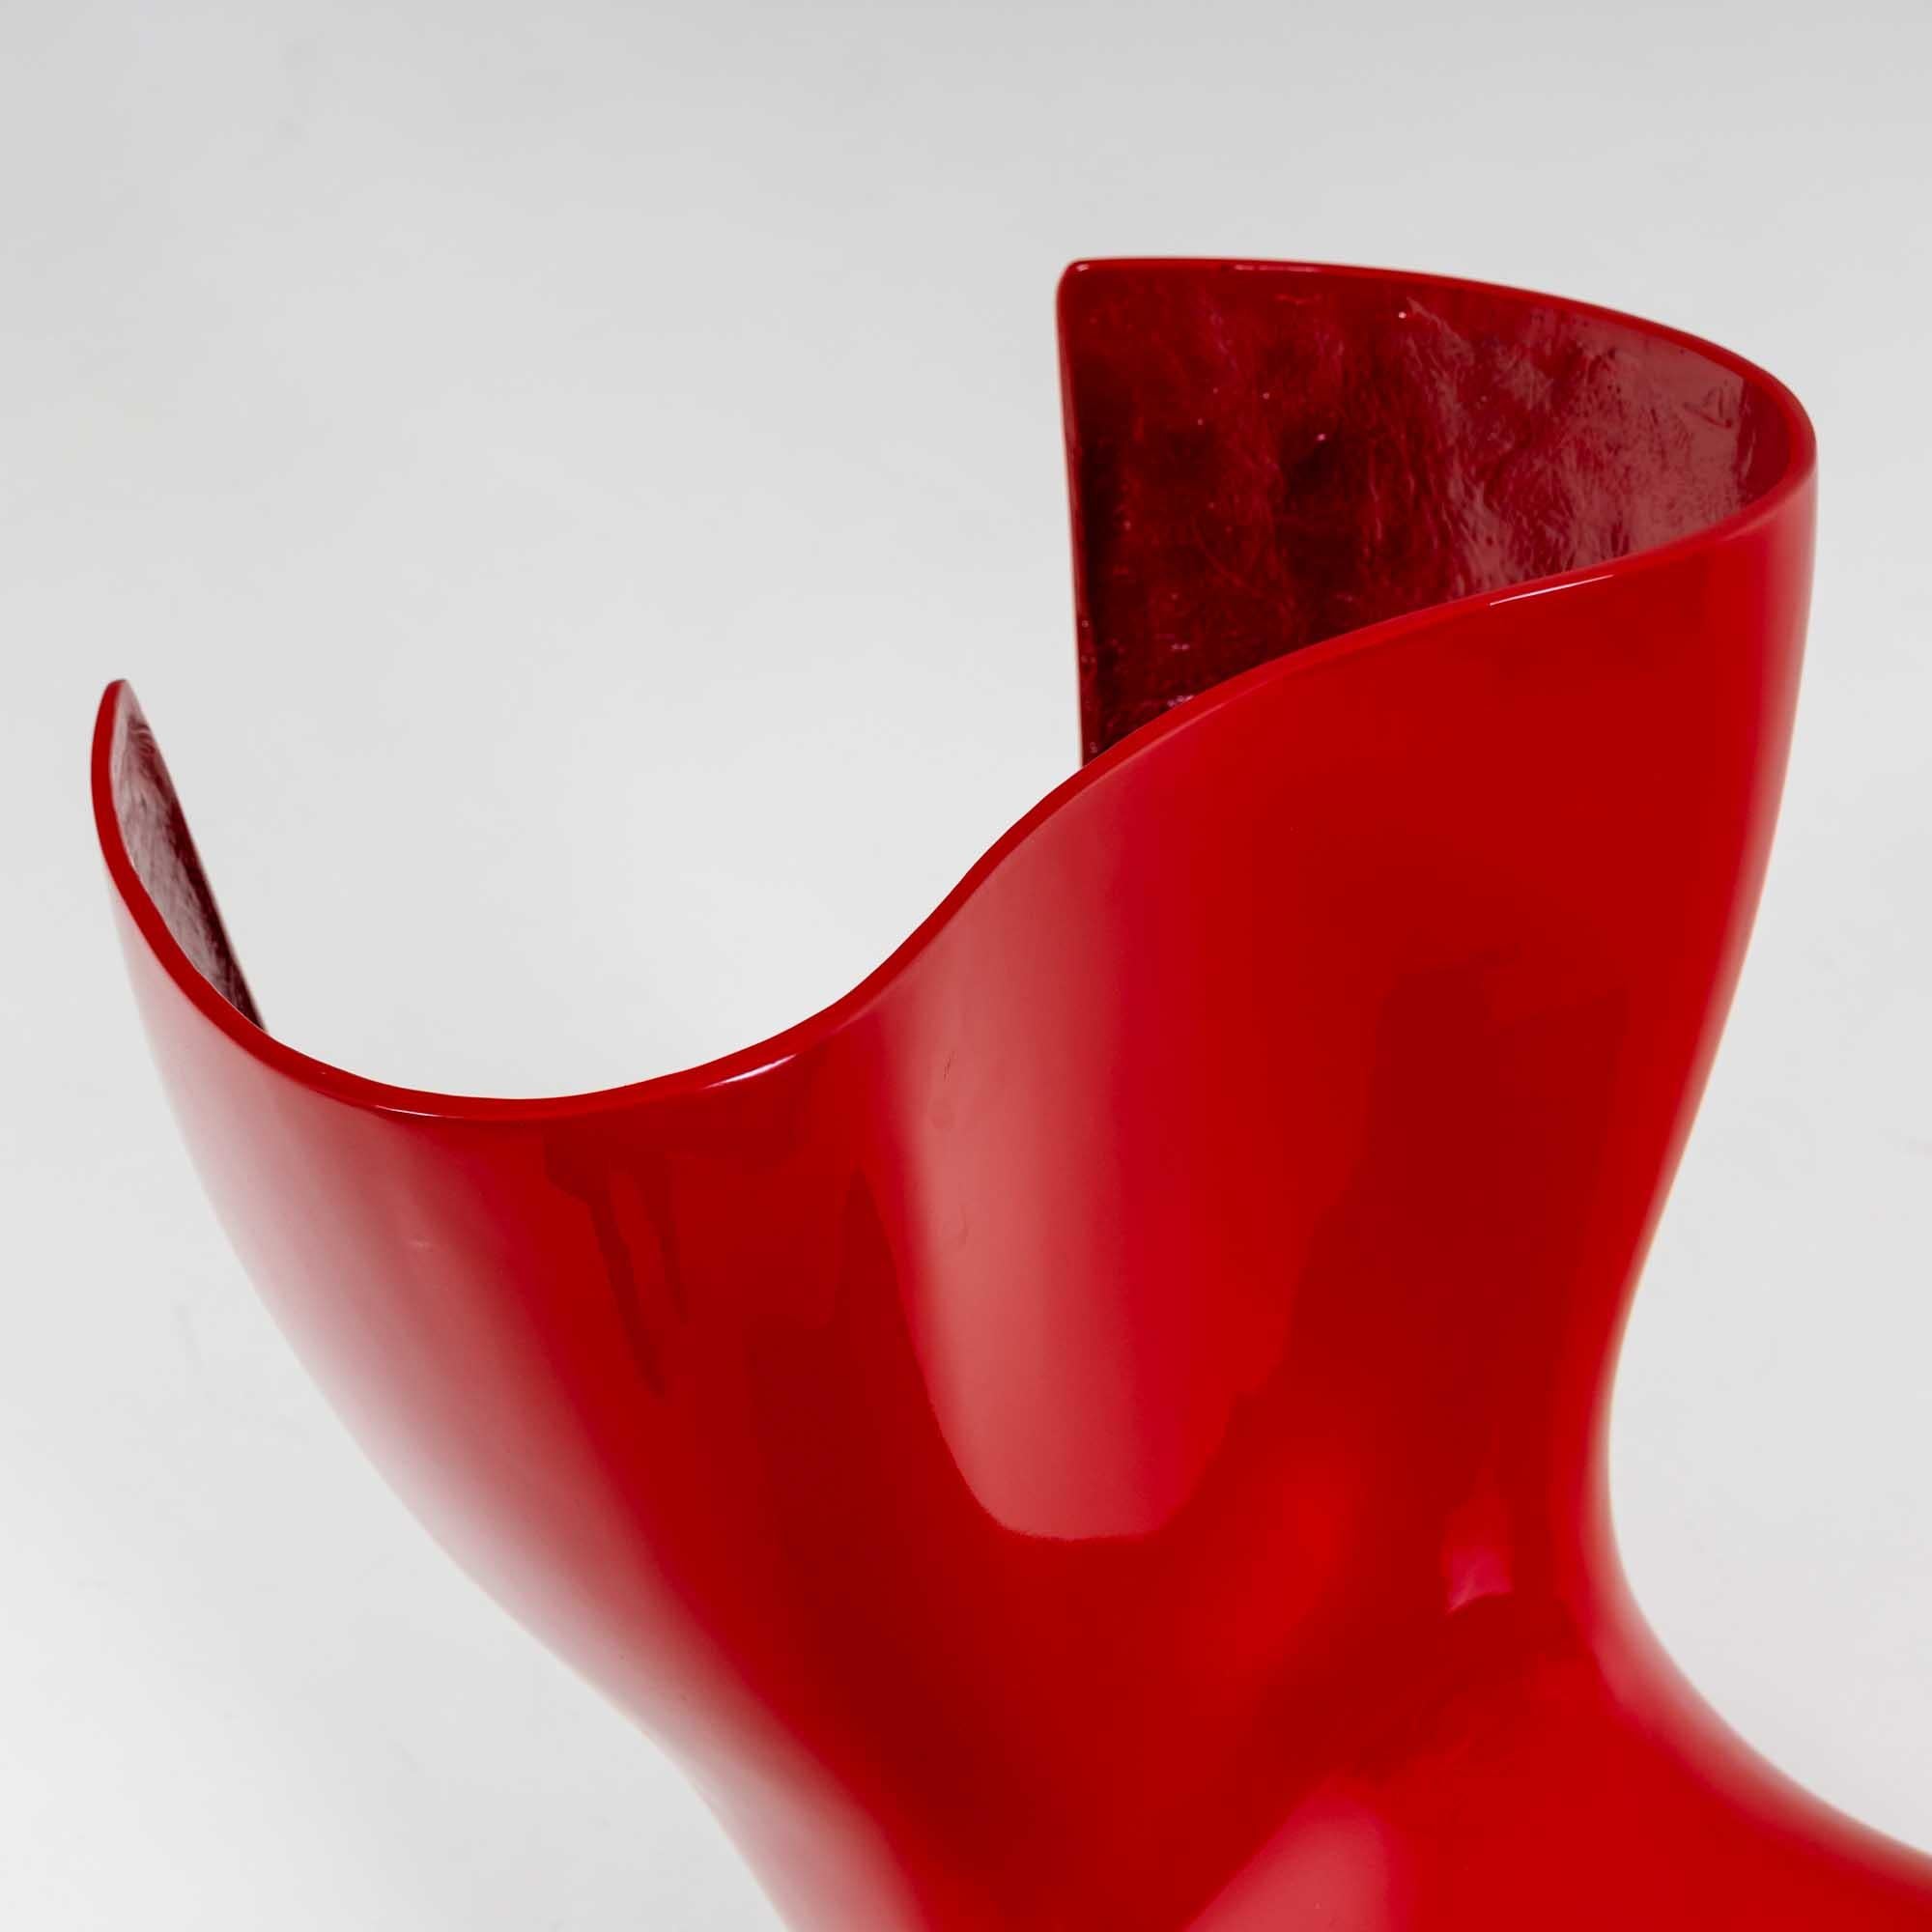 Aluminum Felt Chair by Marc Newson for Cappellini, Italy designed in 1993 For Sale